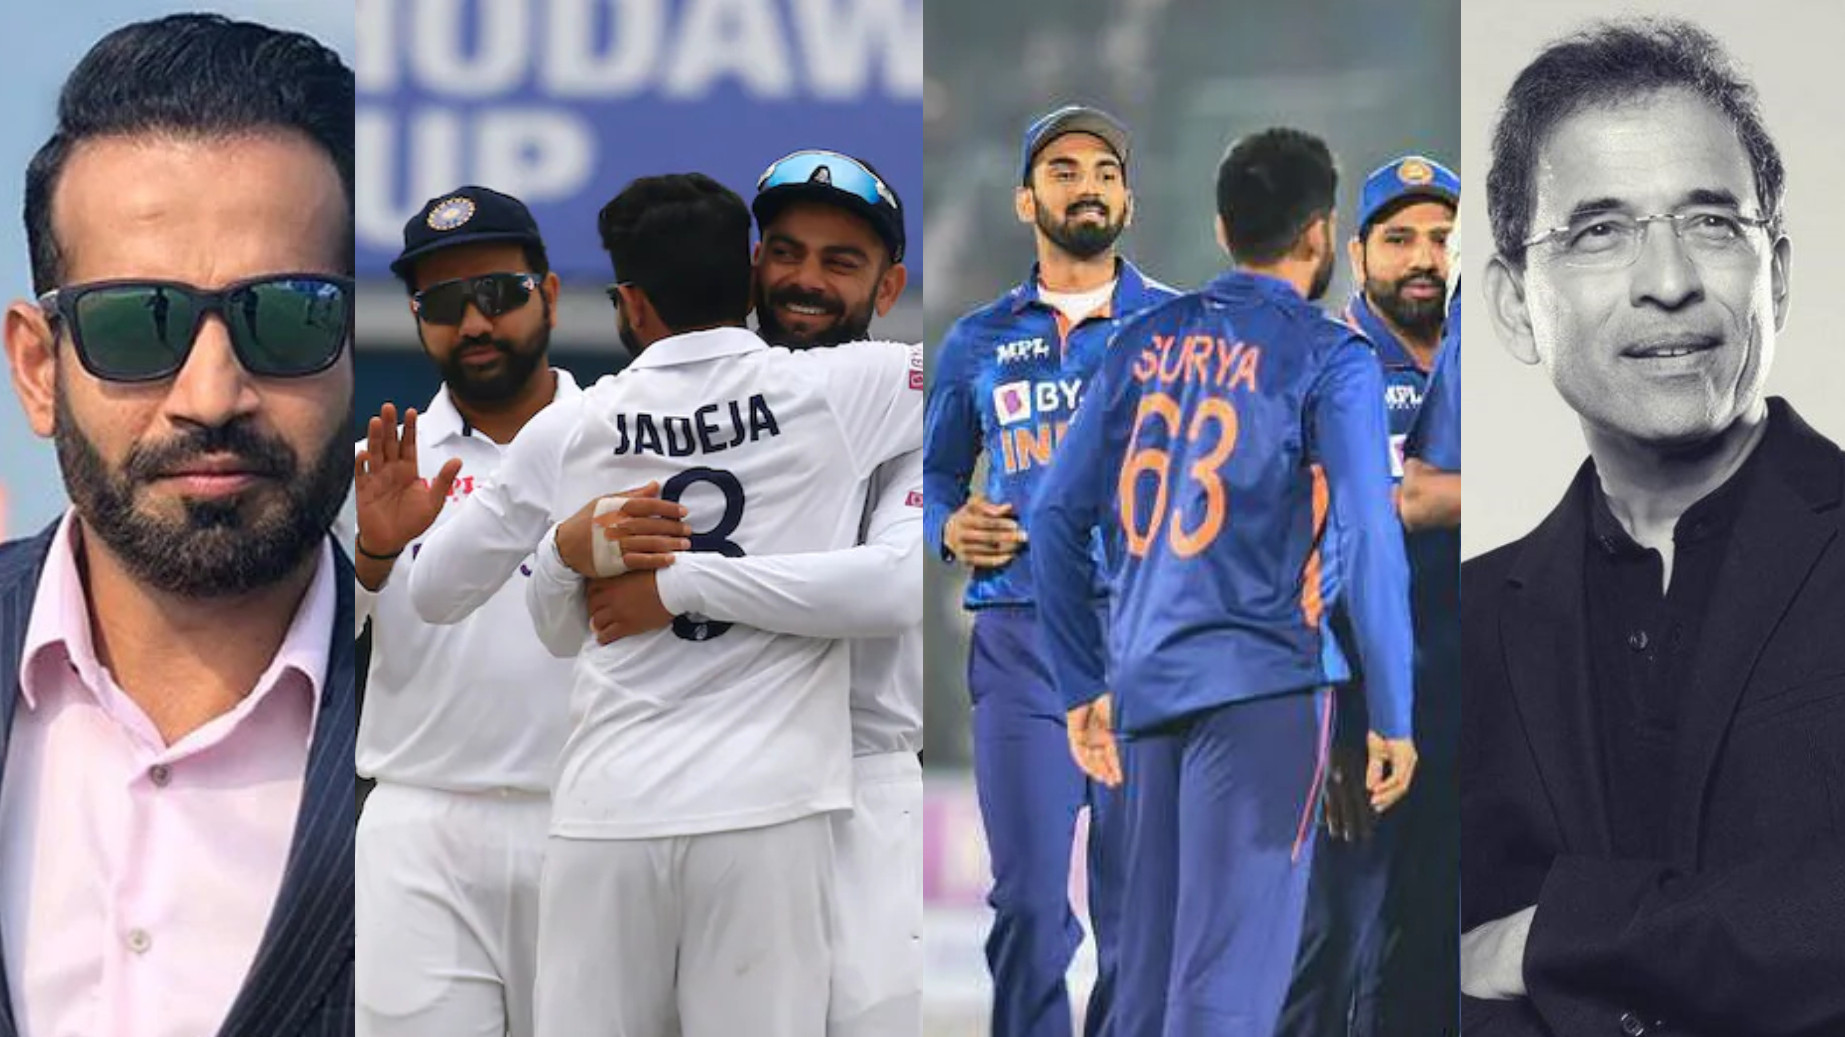 Cricket fraternity reacts to India's squads for SA T20Is and England Test match